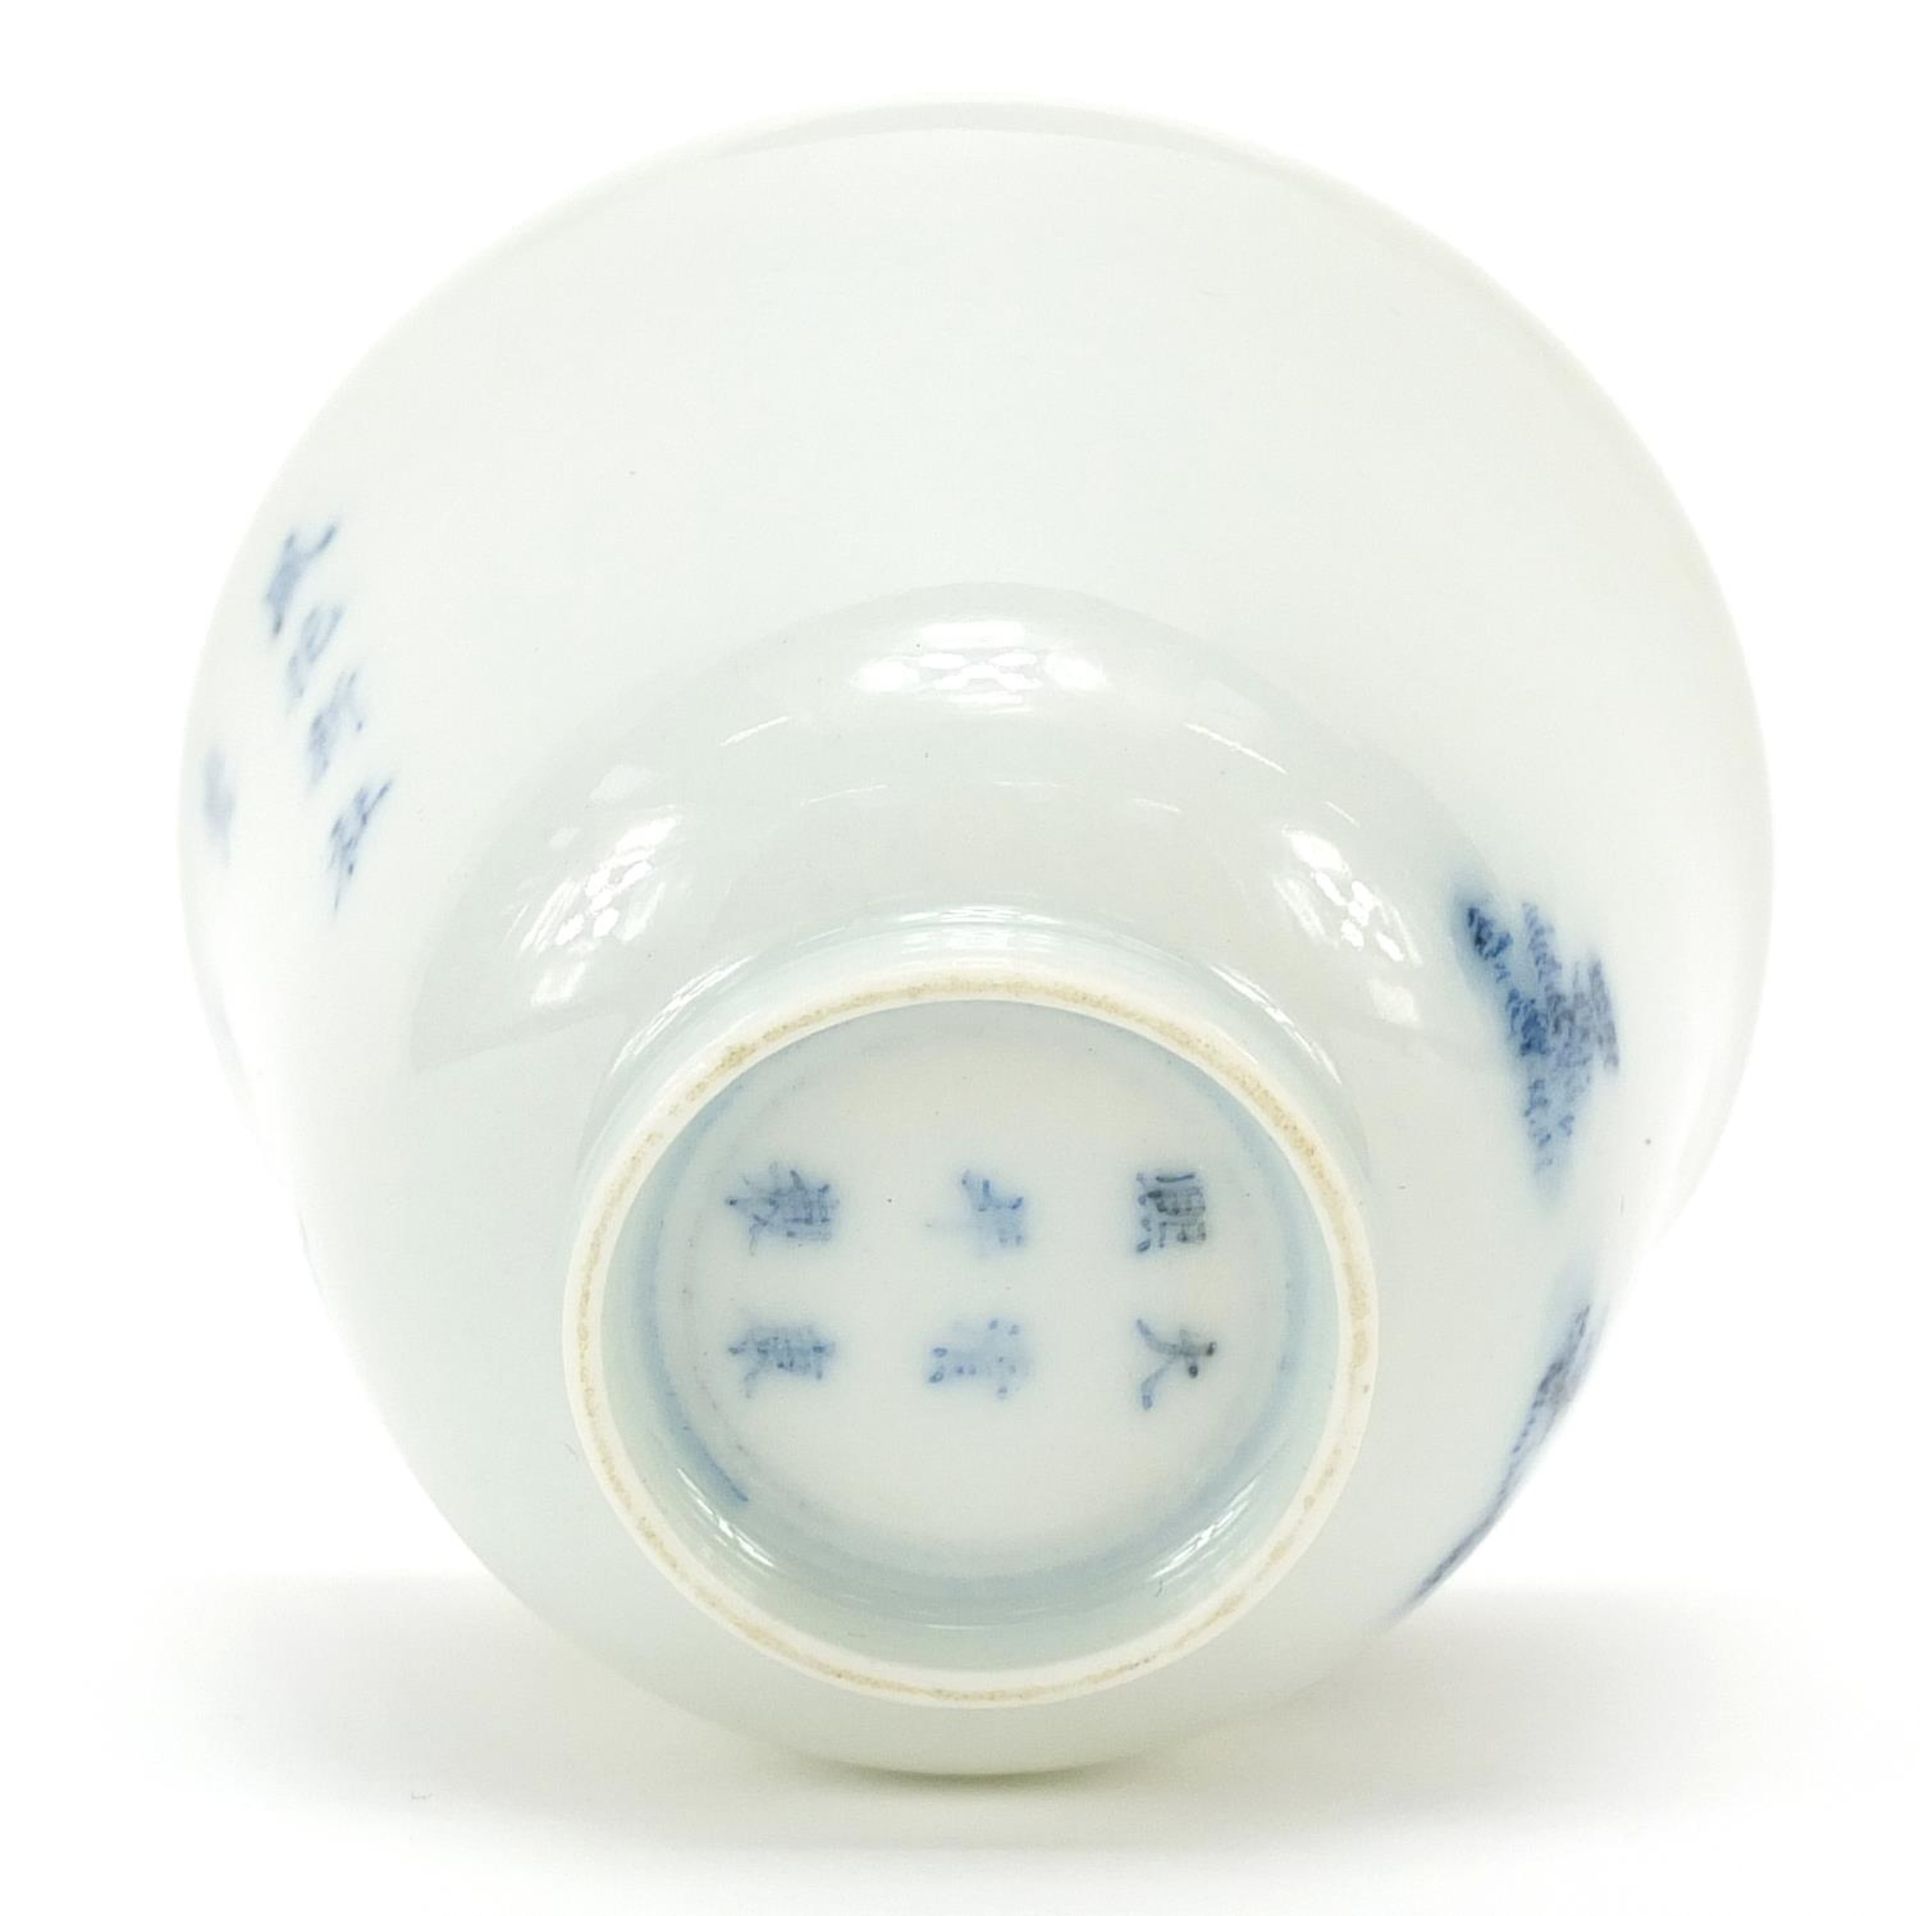 Chinese blue and white porcelain tea bowl hand painted with calligraphy, six figure character - Image 4 of 4